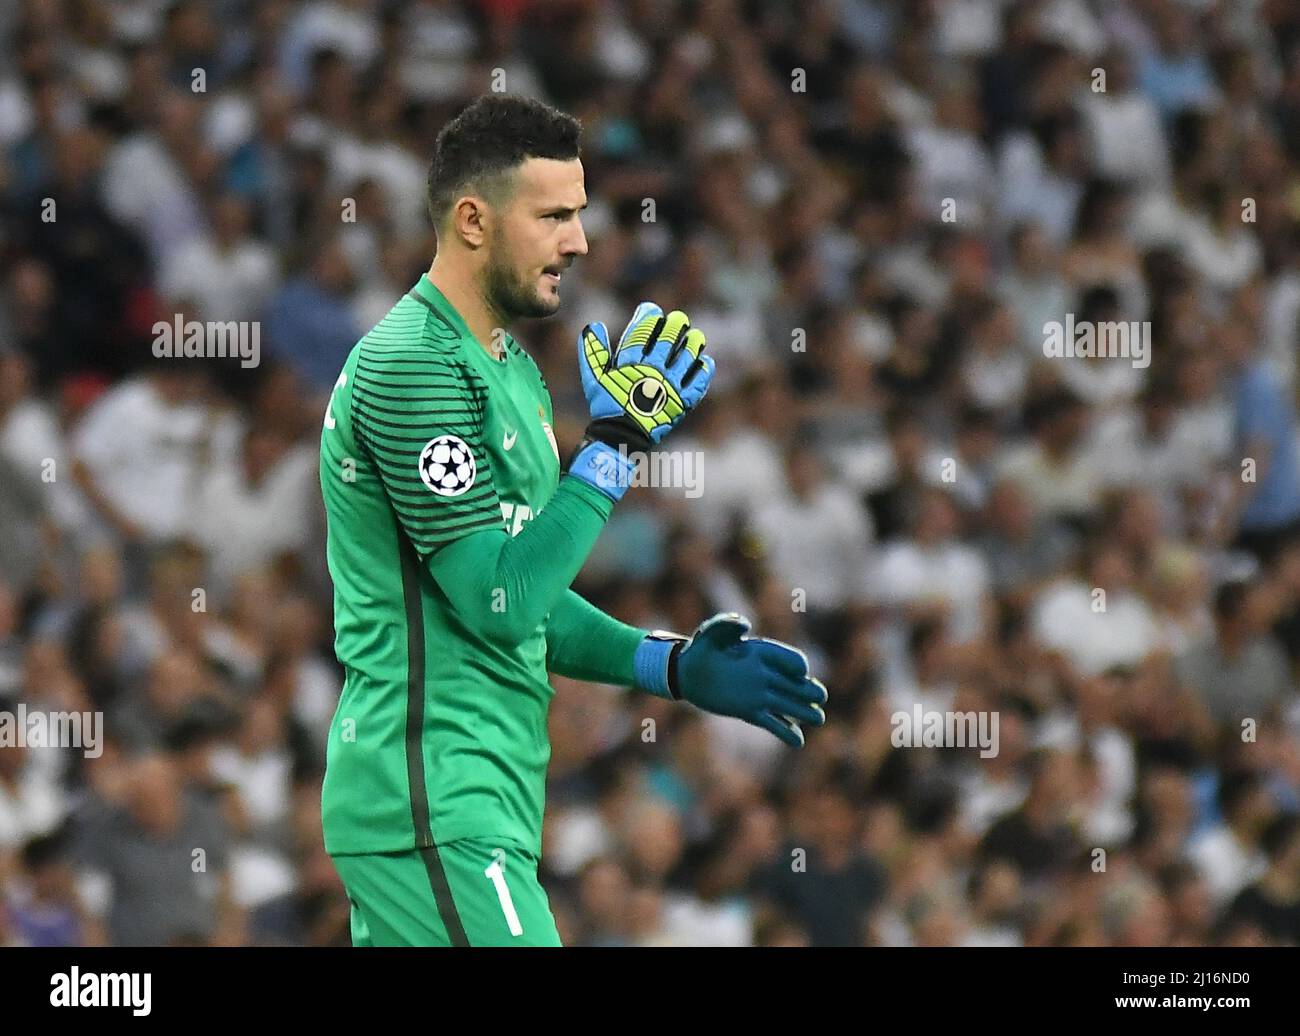 MANCHESTER, ENGLAND - SEPTEMBER 14, 2016: Monaco goalkeeper Danijel Subasic celebrates after a goal scored by his team during the UEFA Champions League Group E game between Tottenham Hotspur and AS Monaco at Wembley Stadium. Copyright: Cosmin Iftode/Picstaff Stock Photo